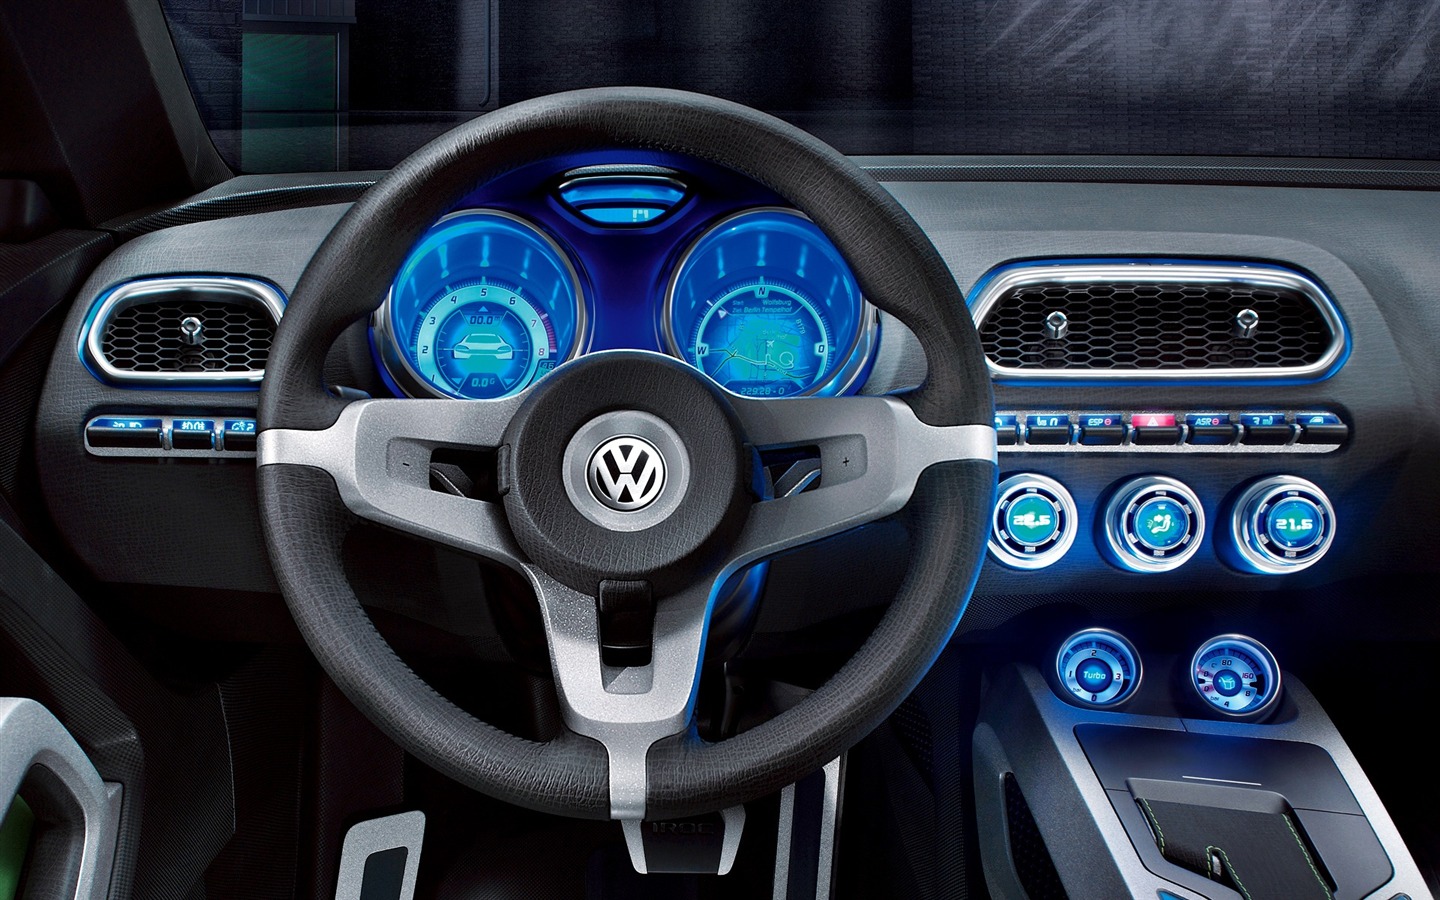 Volkswagen Concept Car tapety (2) #6 - 1440x900